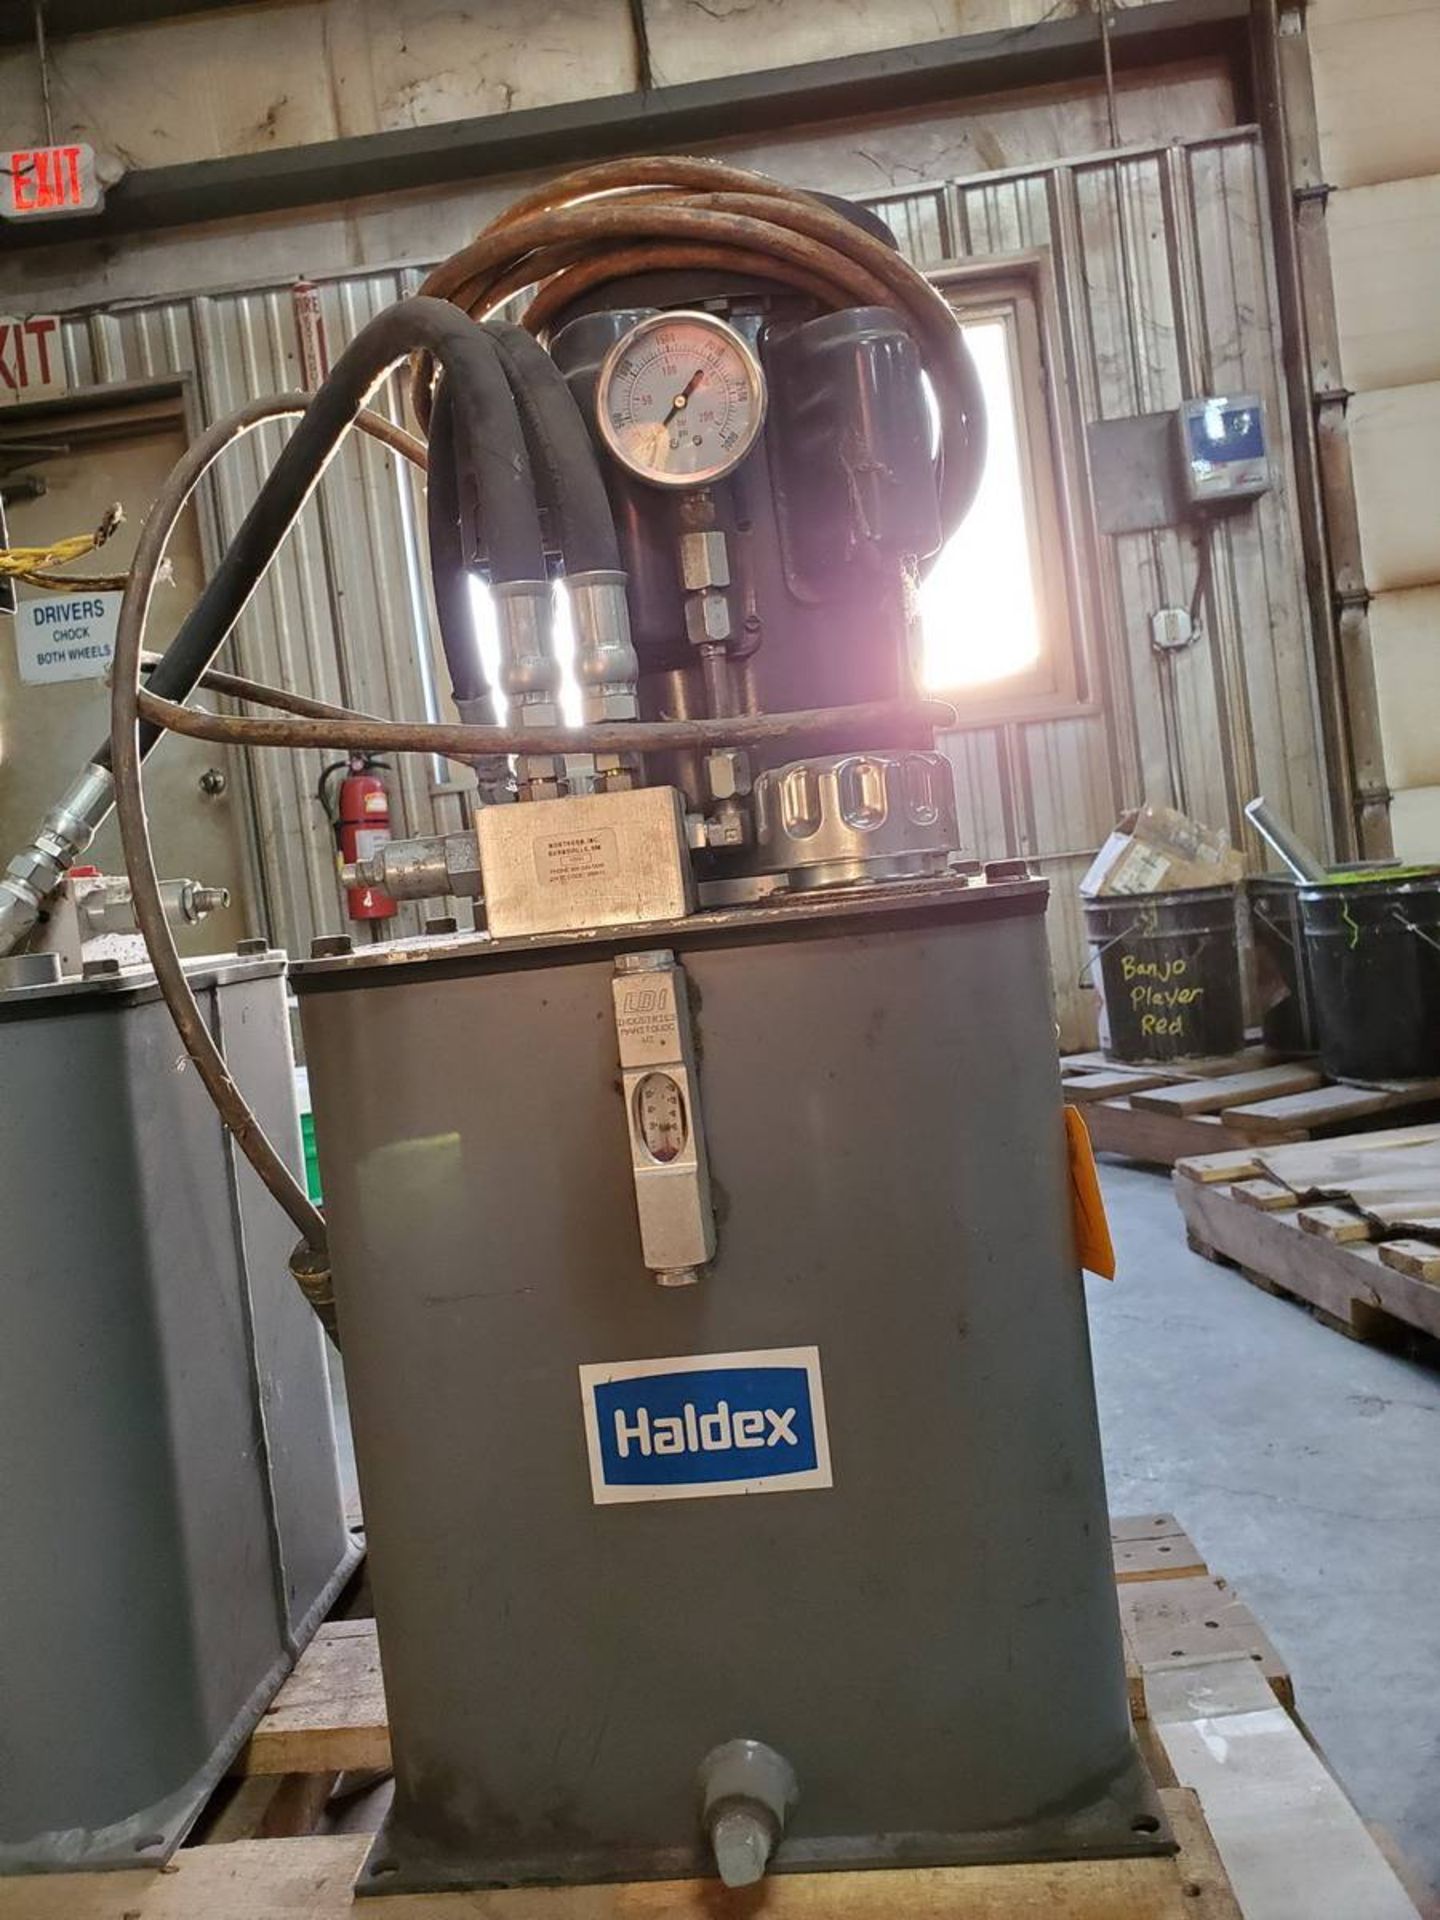 Haldex 1400028 AC Hydraulic Power System Self-Contained - Image 2 of 4